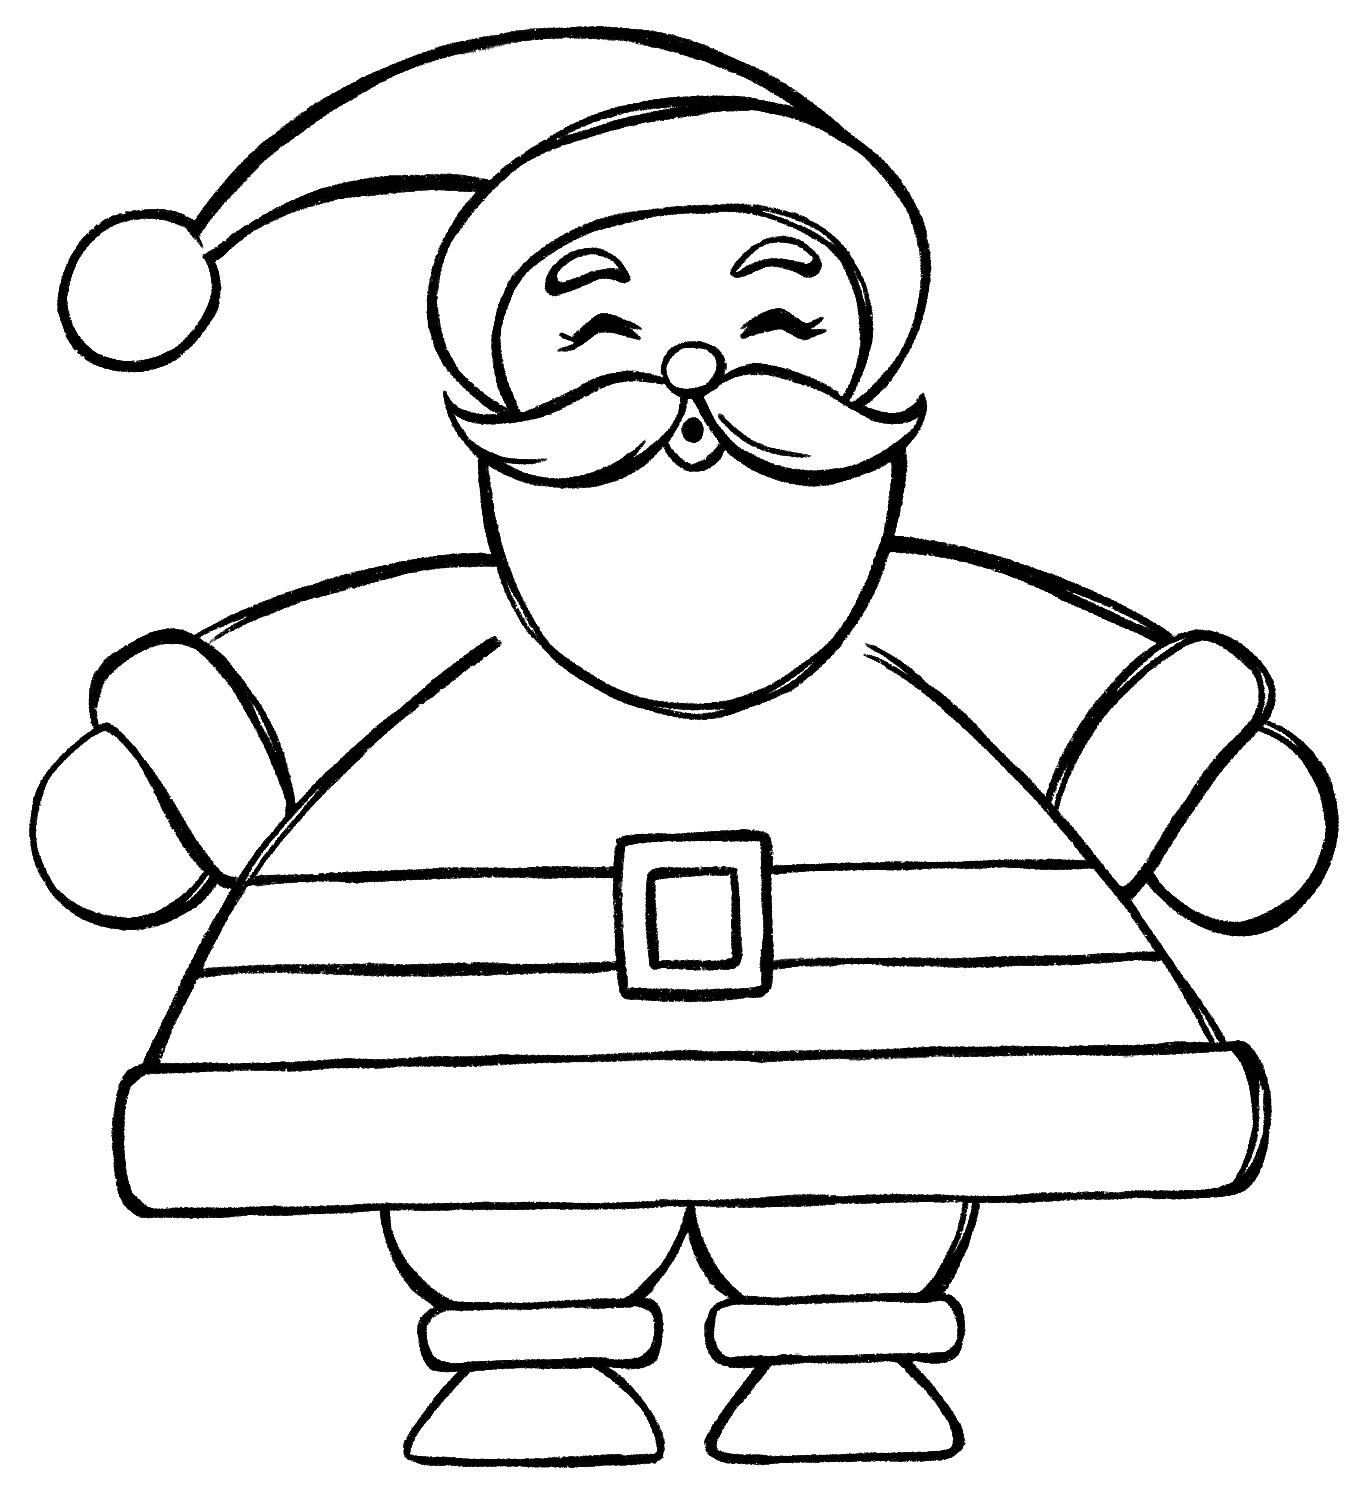 Easy Cute Drawings - Draw Santa Claus easy for this Christmas  https://youtu.be/WFRxzlKizU8 | Facebook